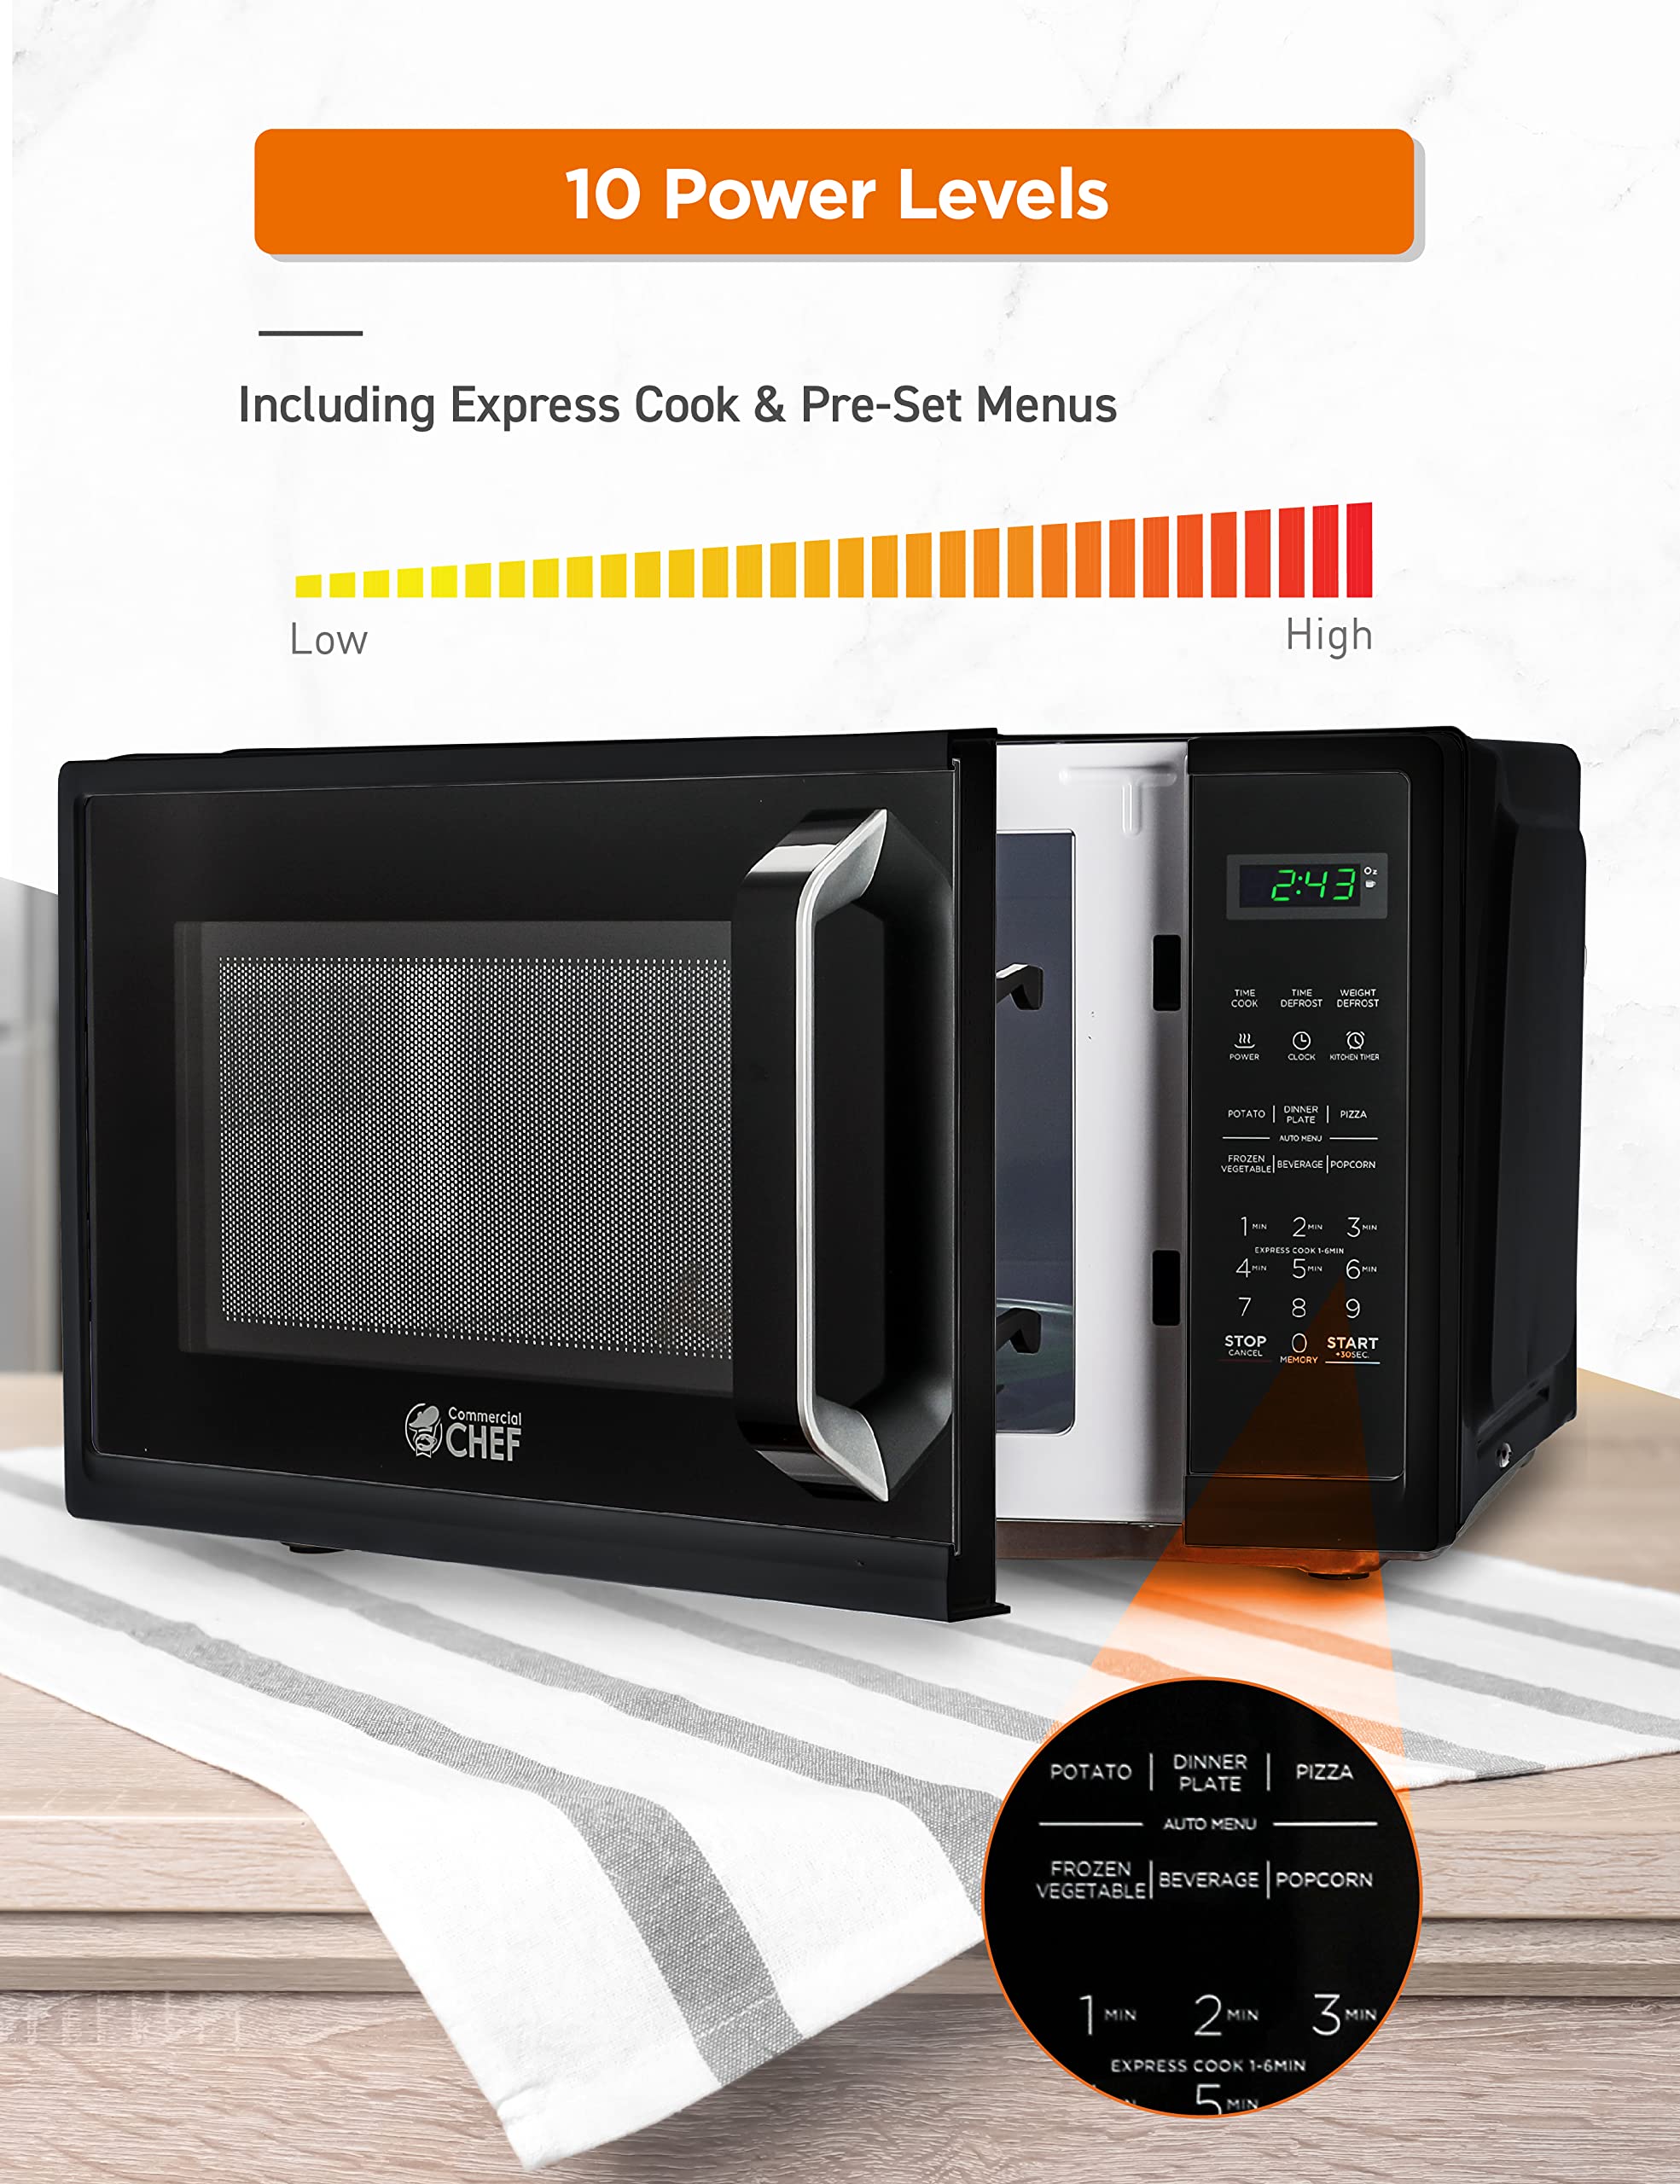 COMMERCIAL CHEF Small Microwave 0.9 Cu. Ft. Countertop Microwave with Touch Controls & Digital Display, Black & Nordic Ware BPA-free and Melamine Free Plastic Splatter Microwave Cover